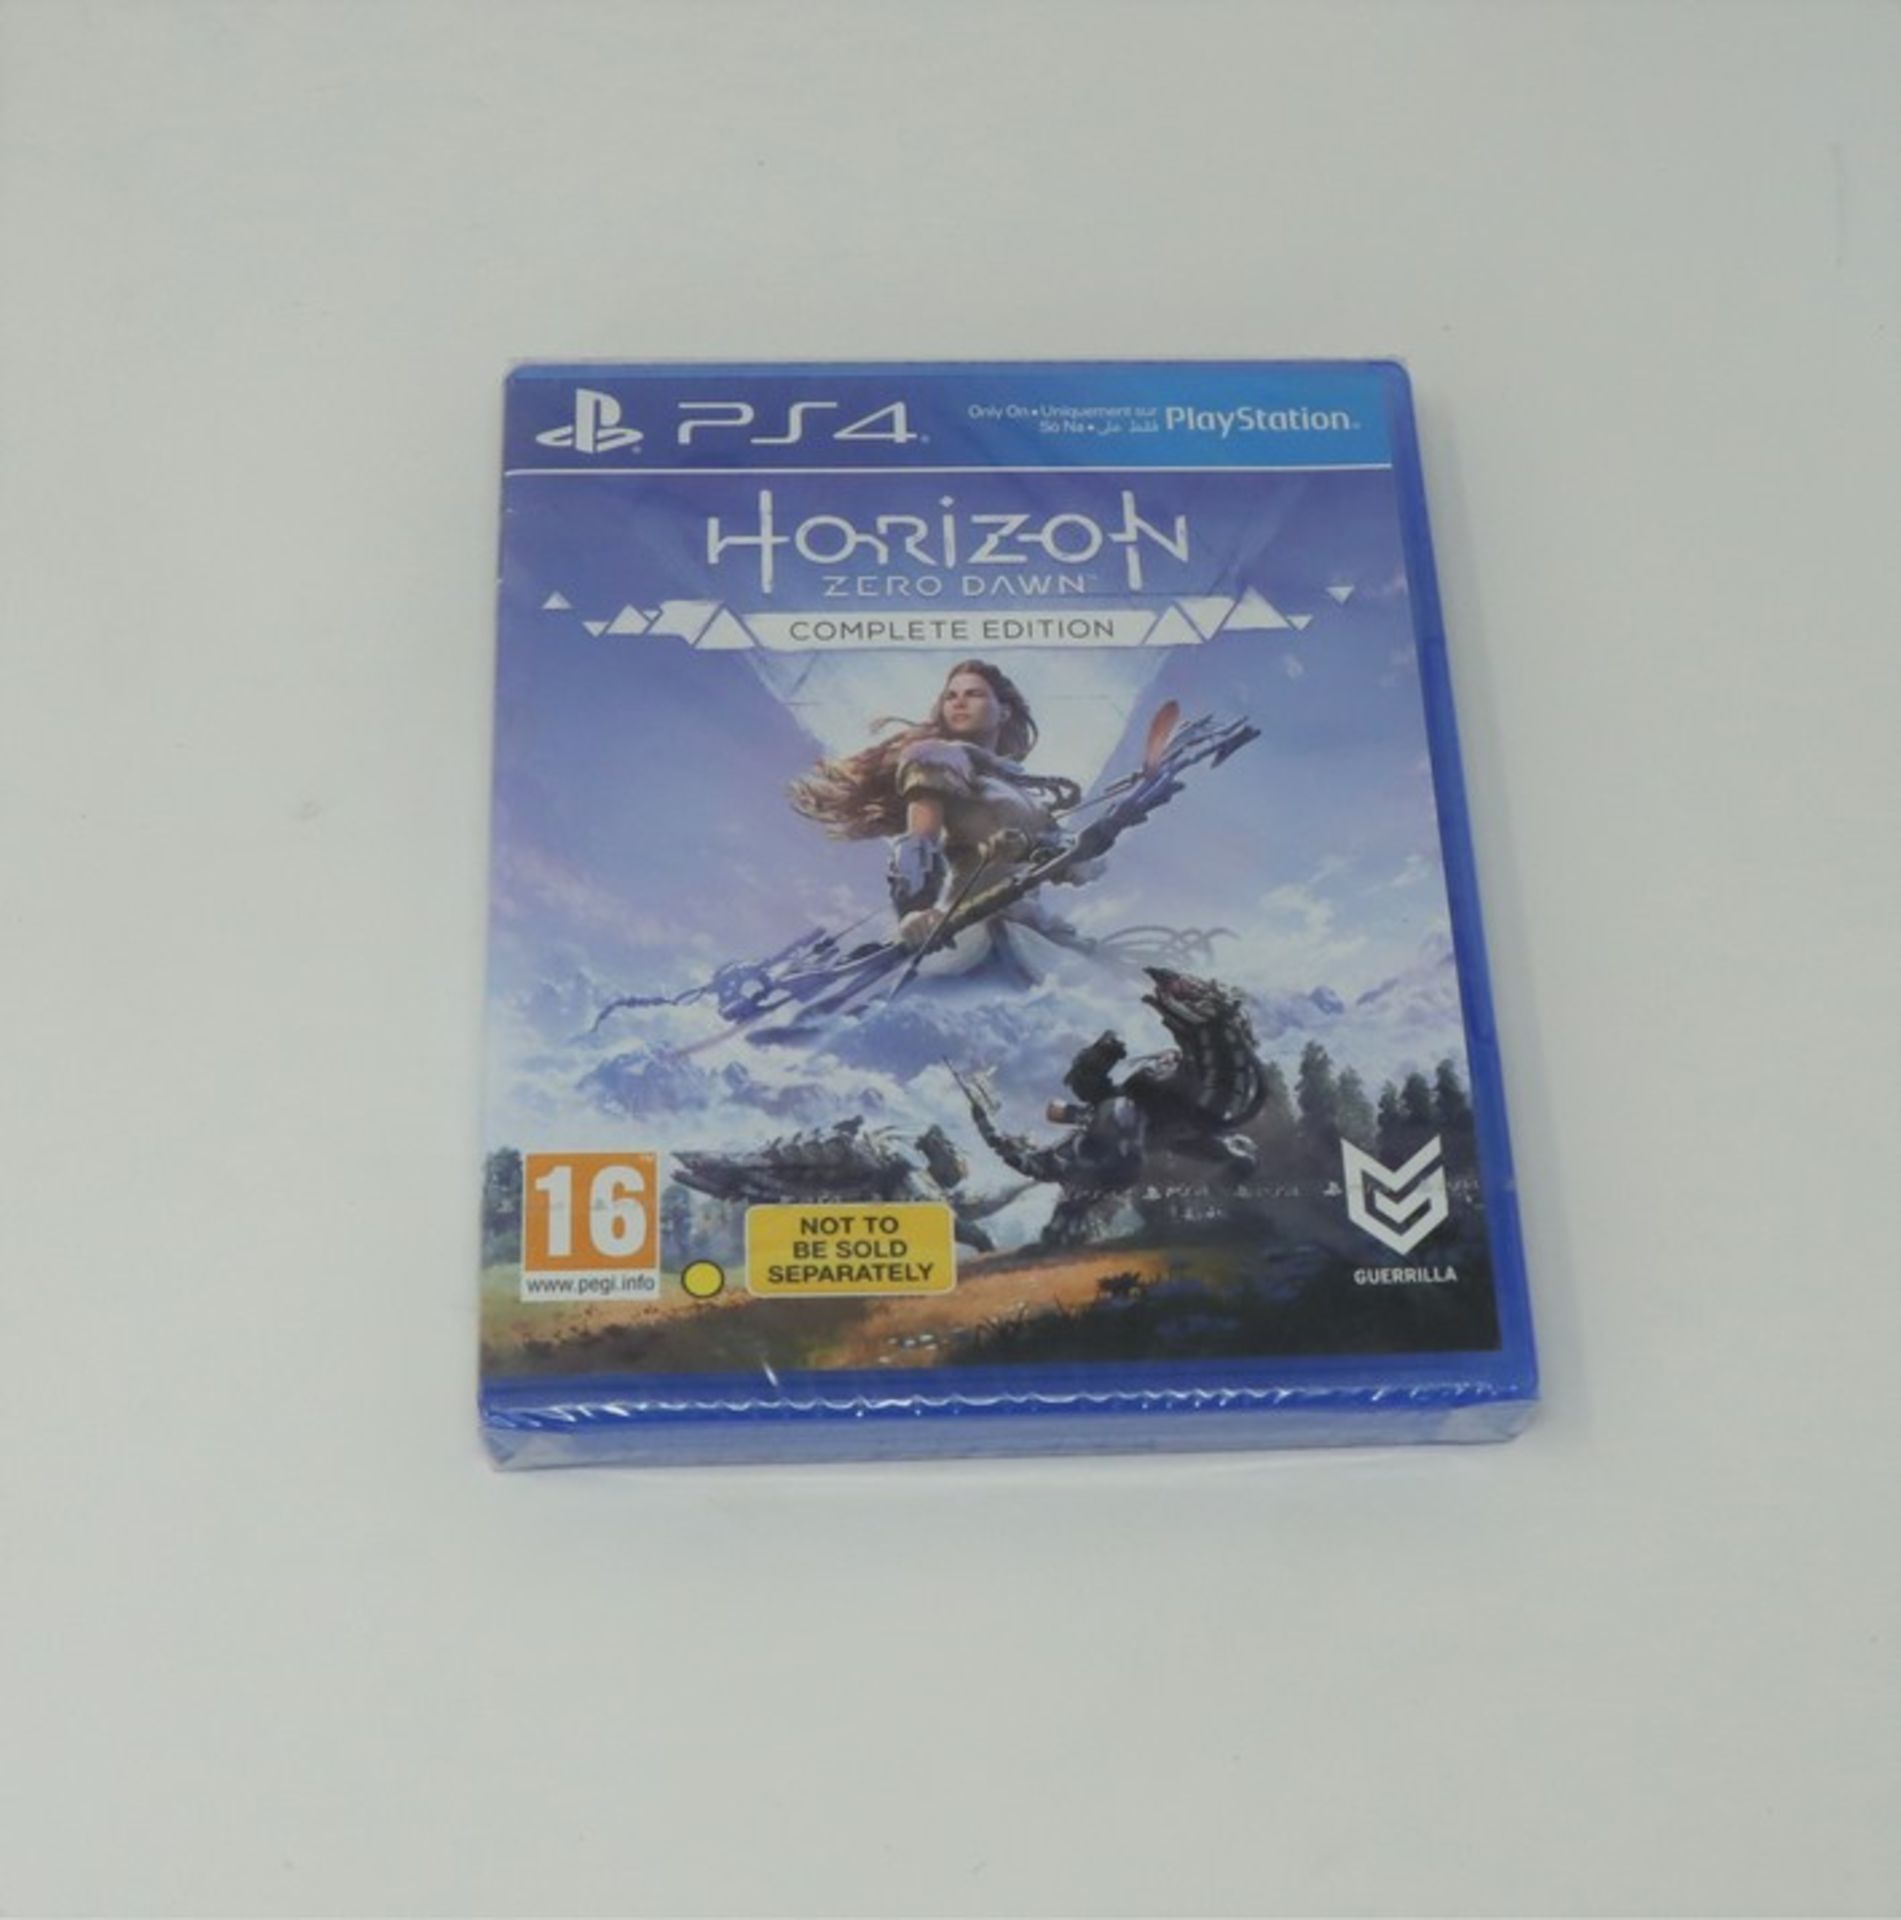 Six as new Horizon Zero Dawn: Complete Edition PS4 Game Disks (Cases sealed, packaging states not to